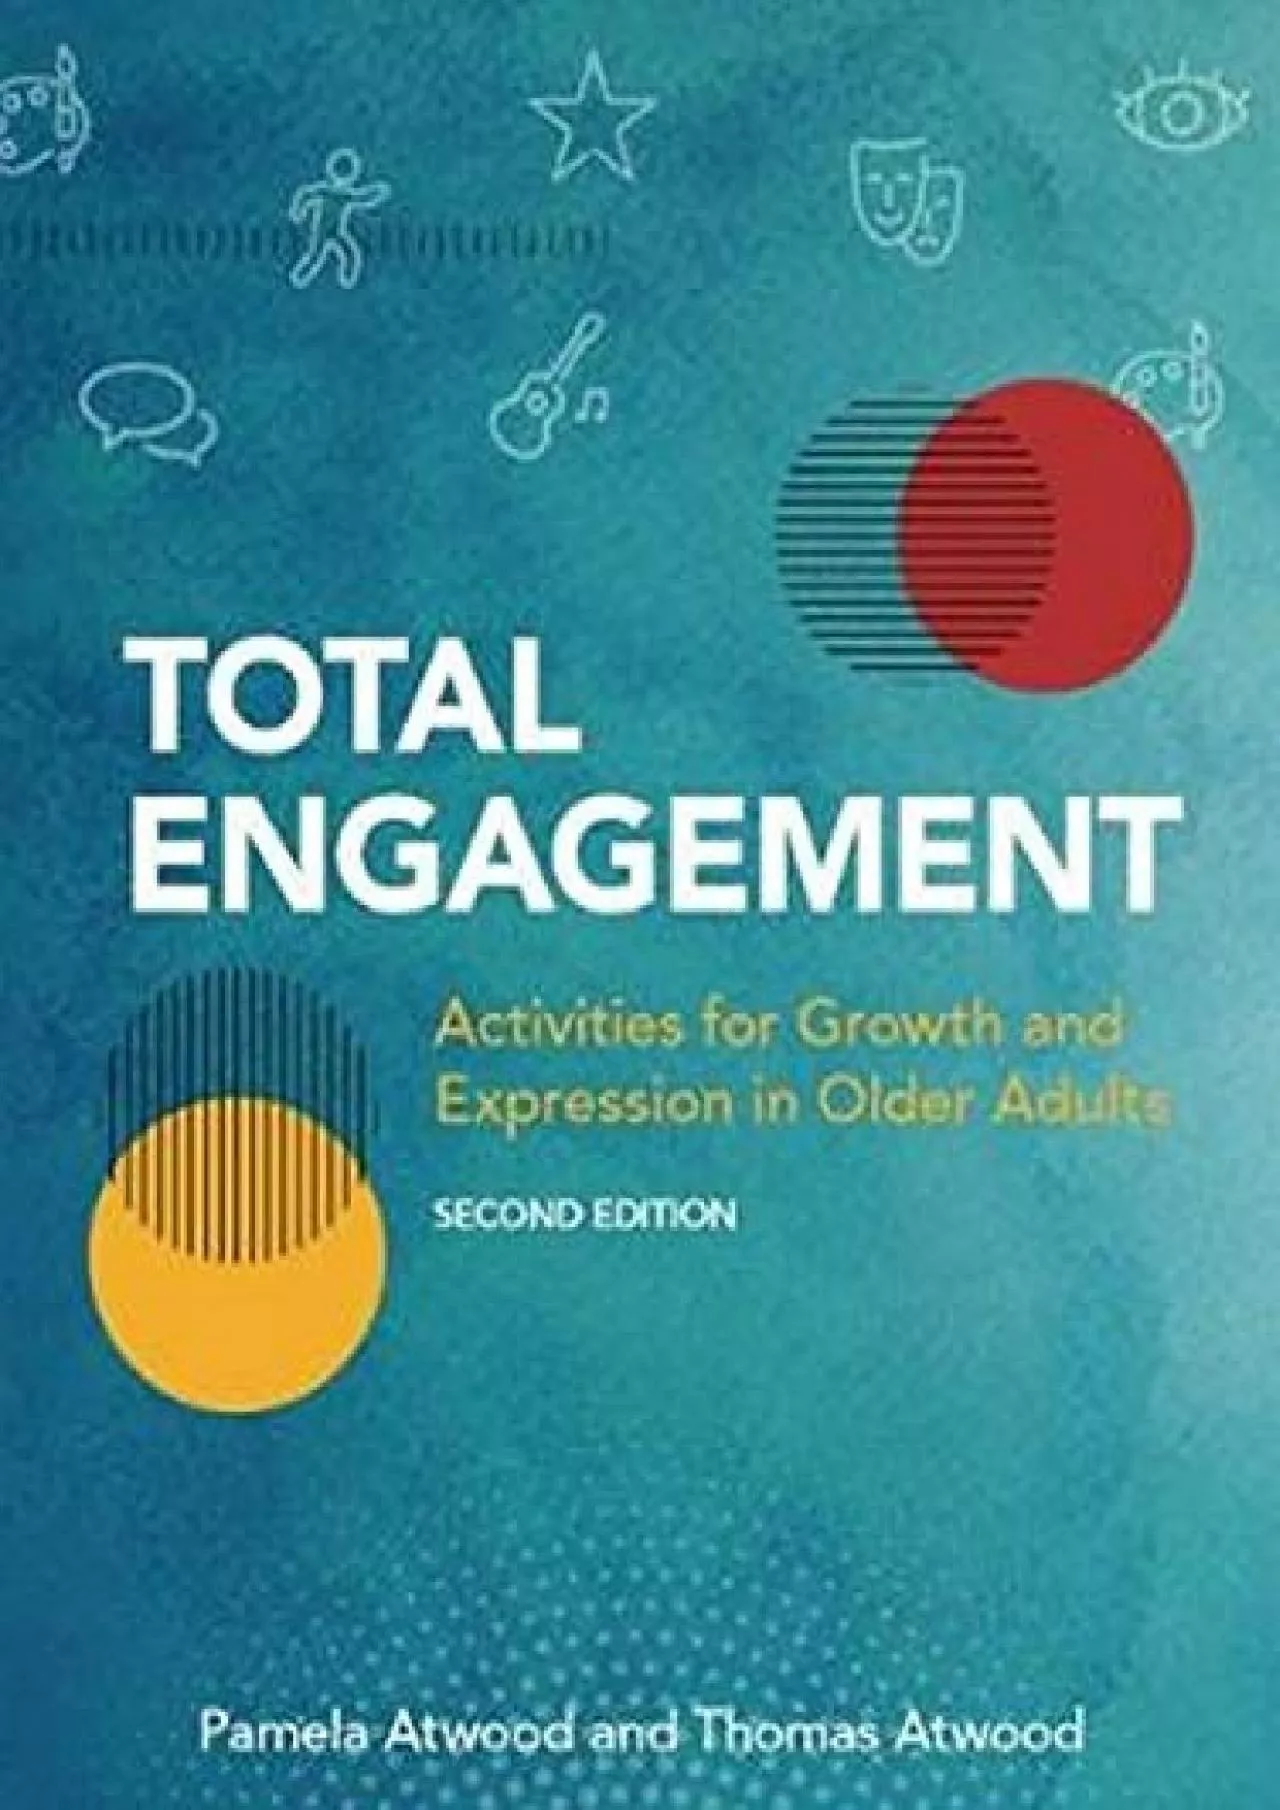 (BOOK)-Total Engagement: Activities for Growth and Expression in Older Adults (Volume